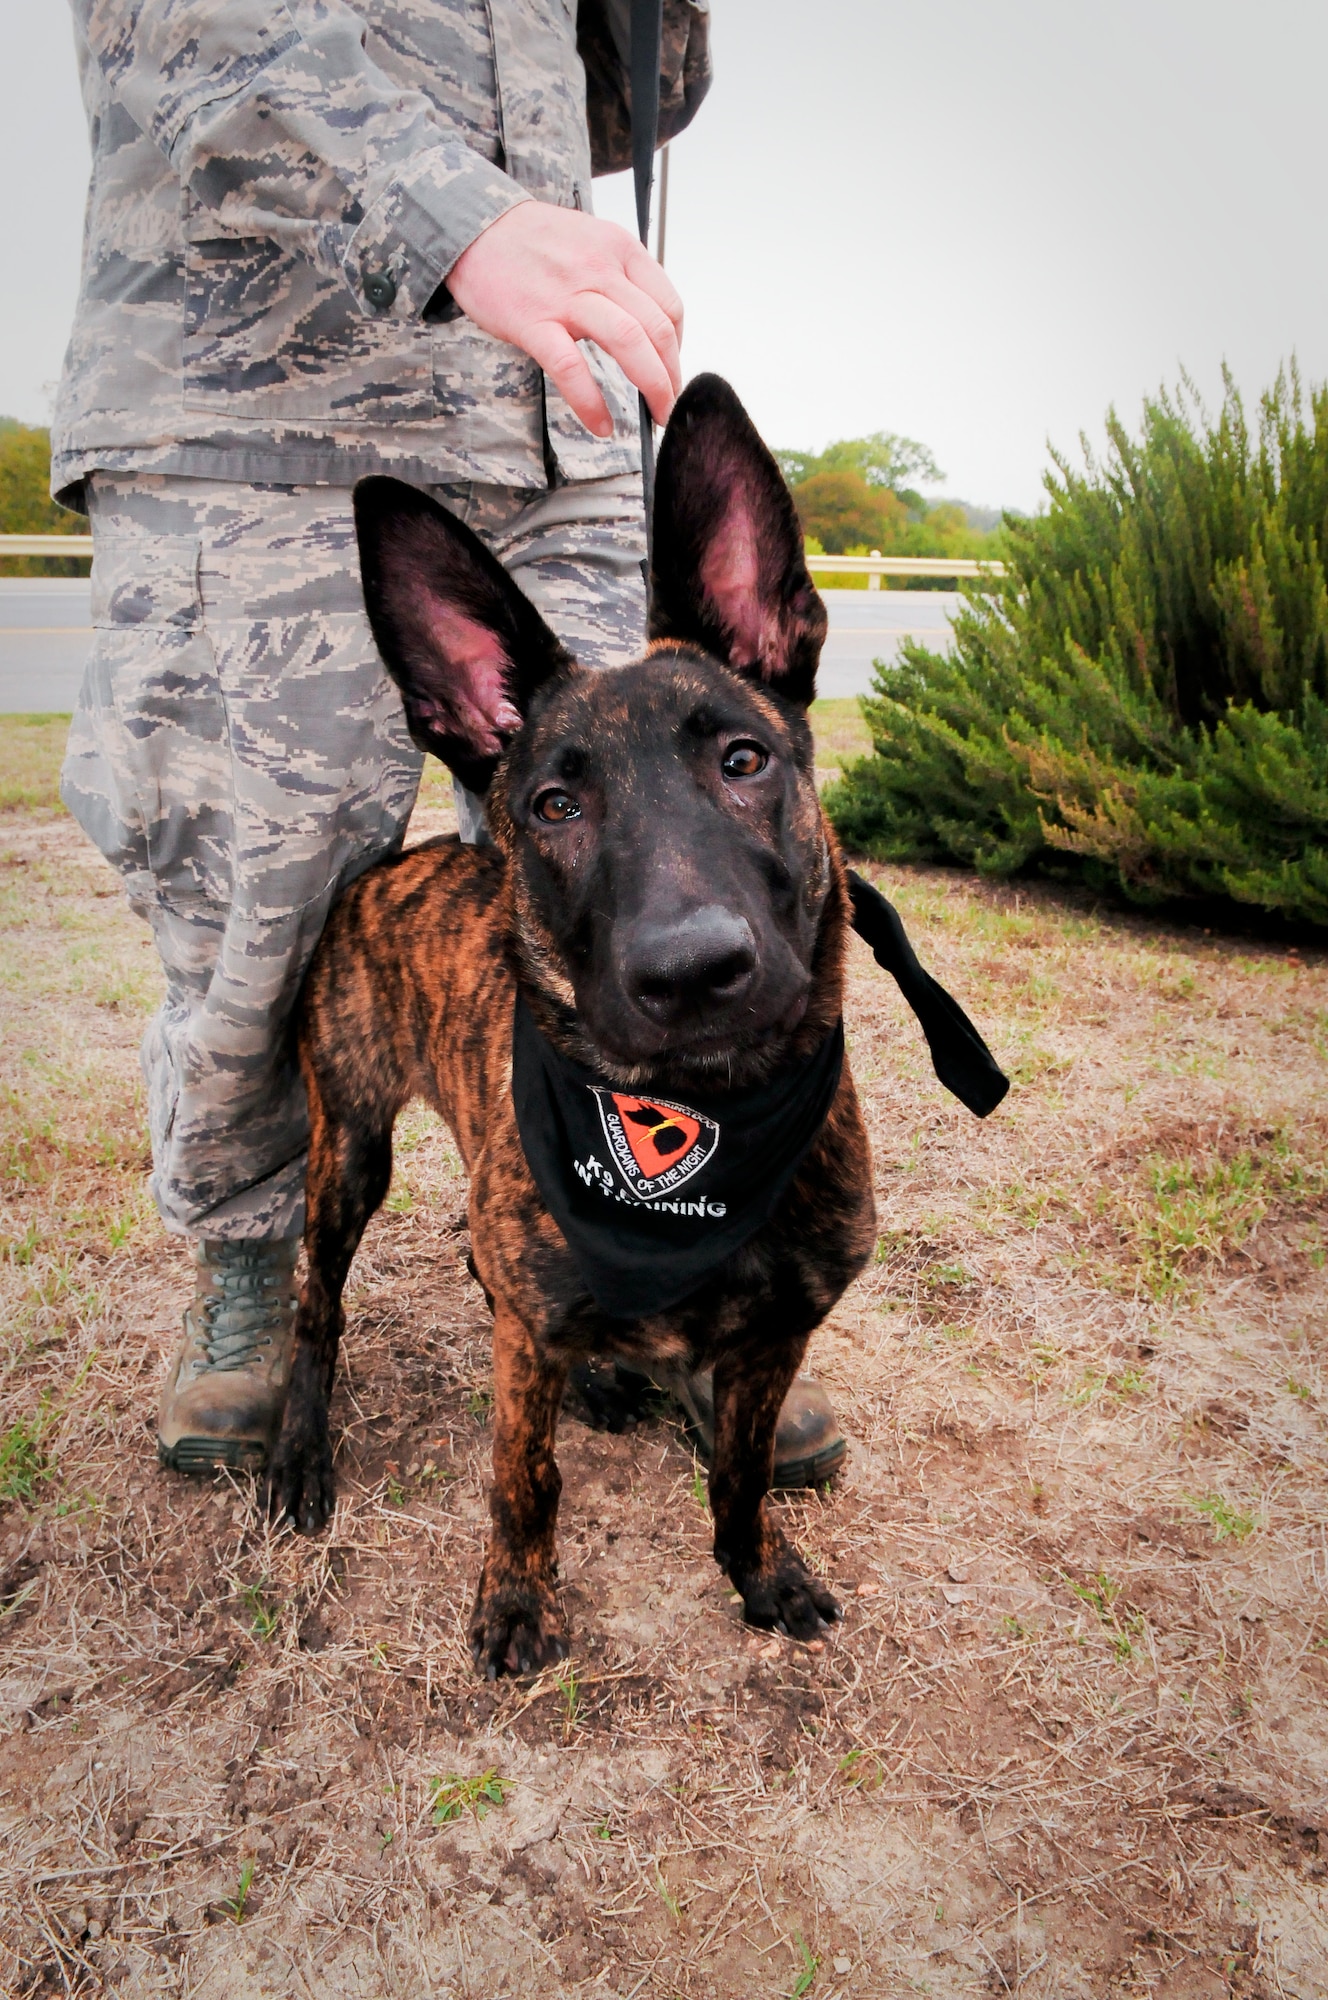 DDexter, a military working dog in training with the Department of Defense?s Military Working Dog Breeding Program, is pictured at Joint Base San Antonio ? Lackland, Texas, Nov. 20, 2014. DDexter is currently being fostered by Tech. Sgt. Brandon M. Harrist, an aircraft electrical and environmental systems craftsman assigned to the 149th Maintenance Squadron, Texas Air National Guard, a subordinate unit of the 149th Fighter Wing, at JBSA-Lackland. (U.S. Air National Guard photo by Senior Master Sgt. Mike Arellano / Released)